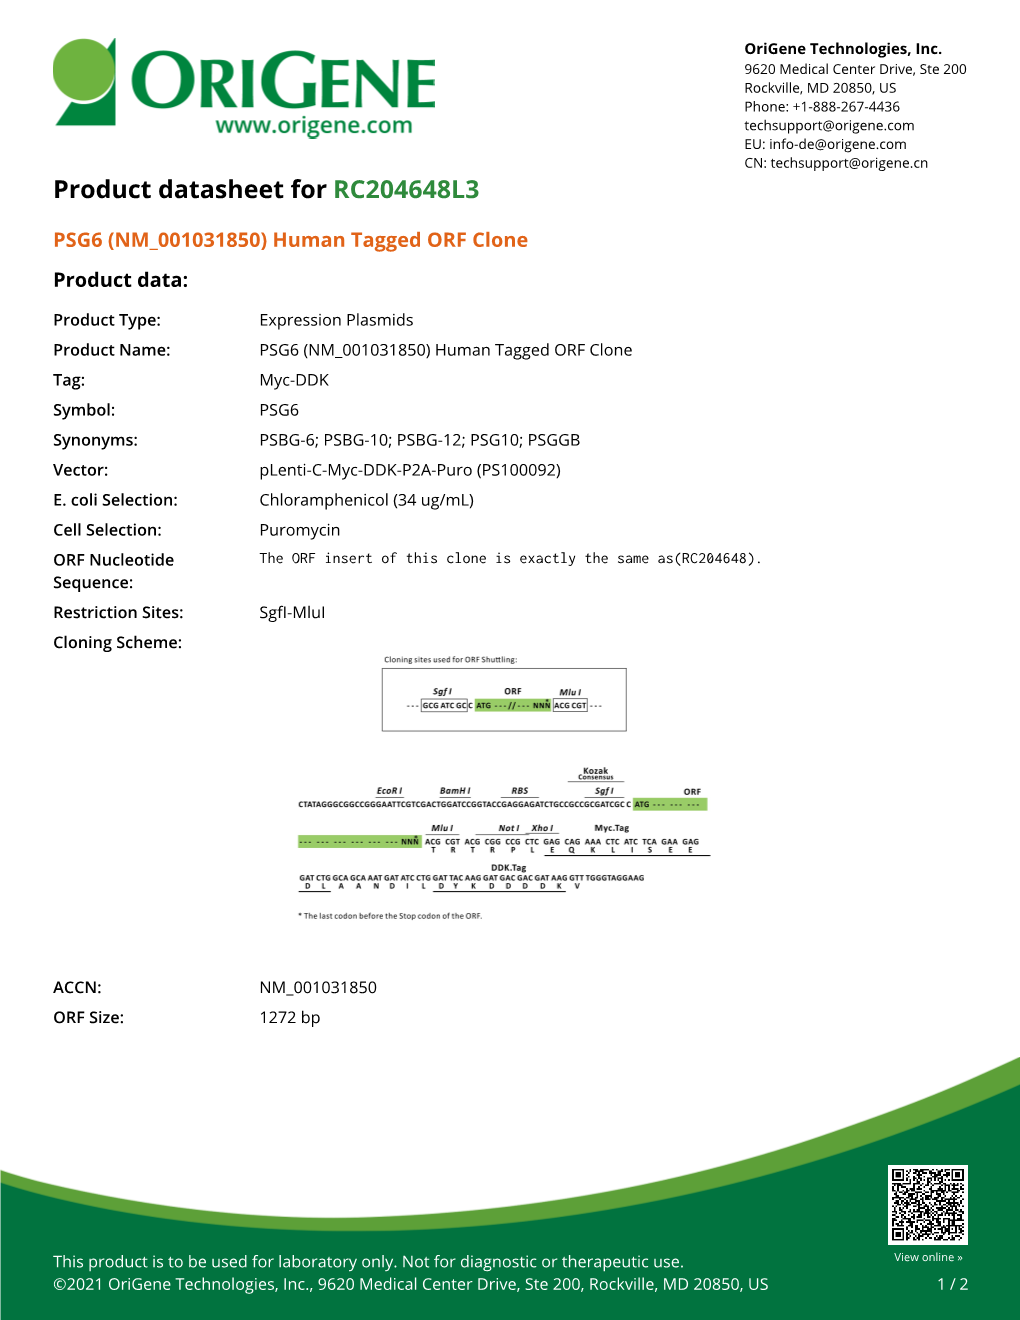 PSG6 (NM 001031850) Human Tagged ORF Clone Product Data